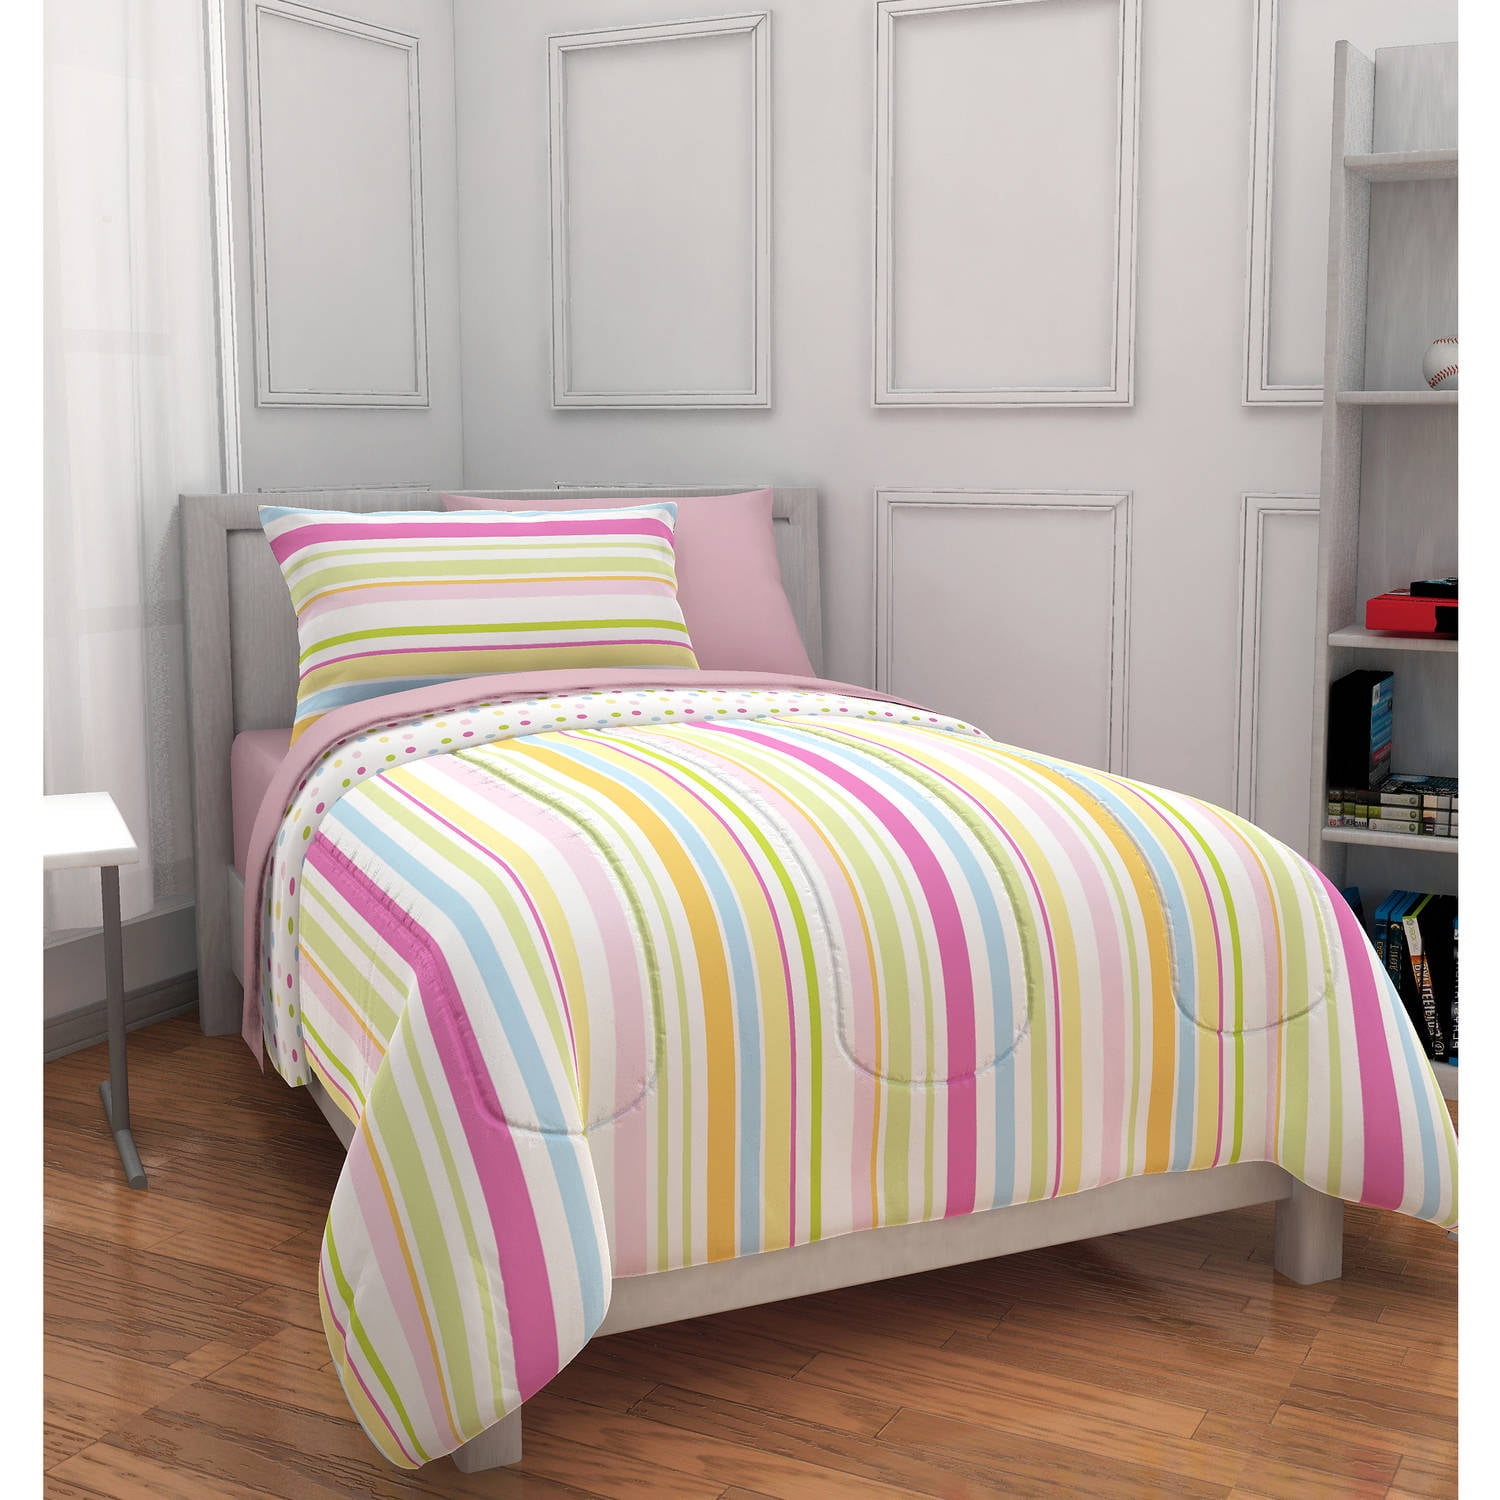 Mainstays Kids Pink Rally Stripe Bed In A Bag Bedding Set